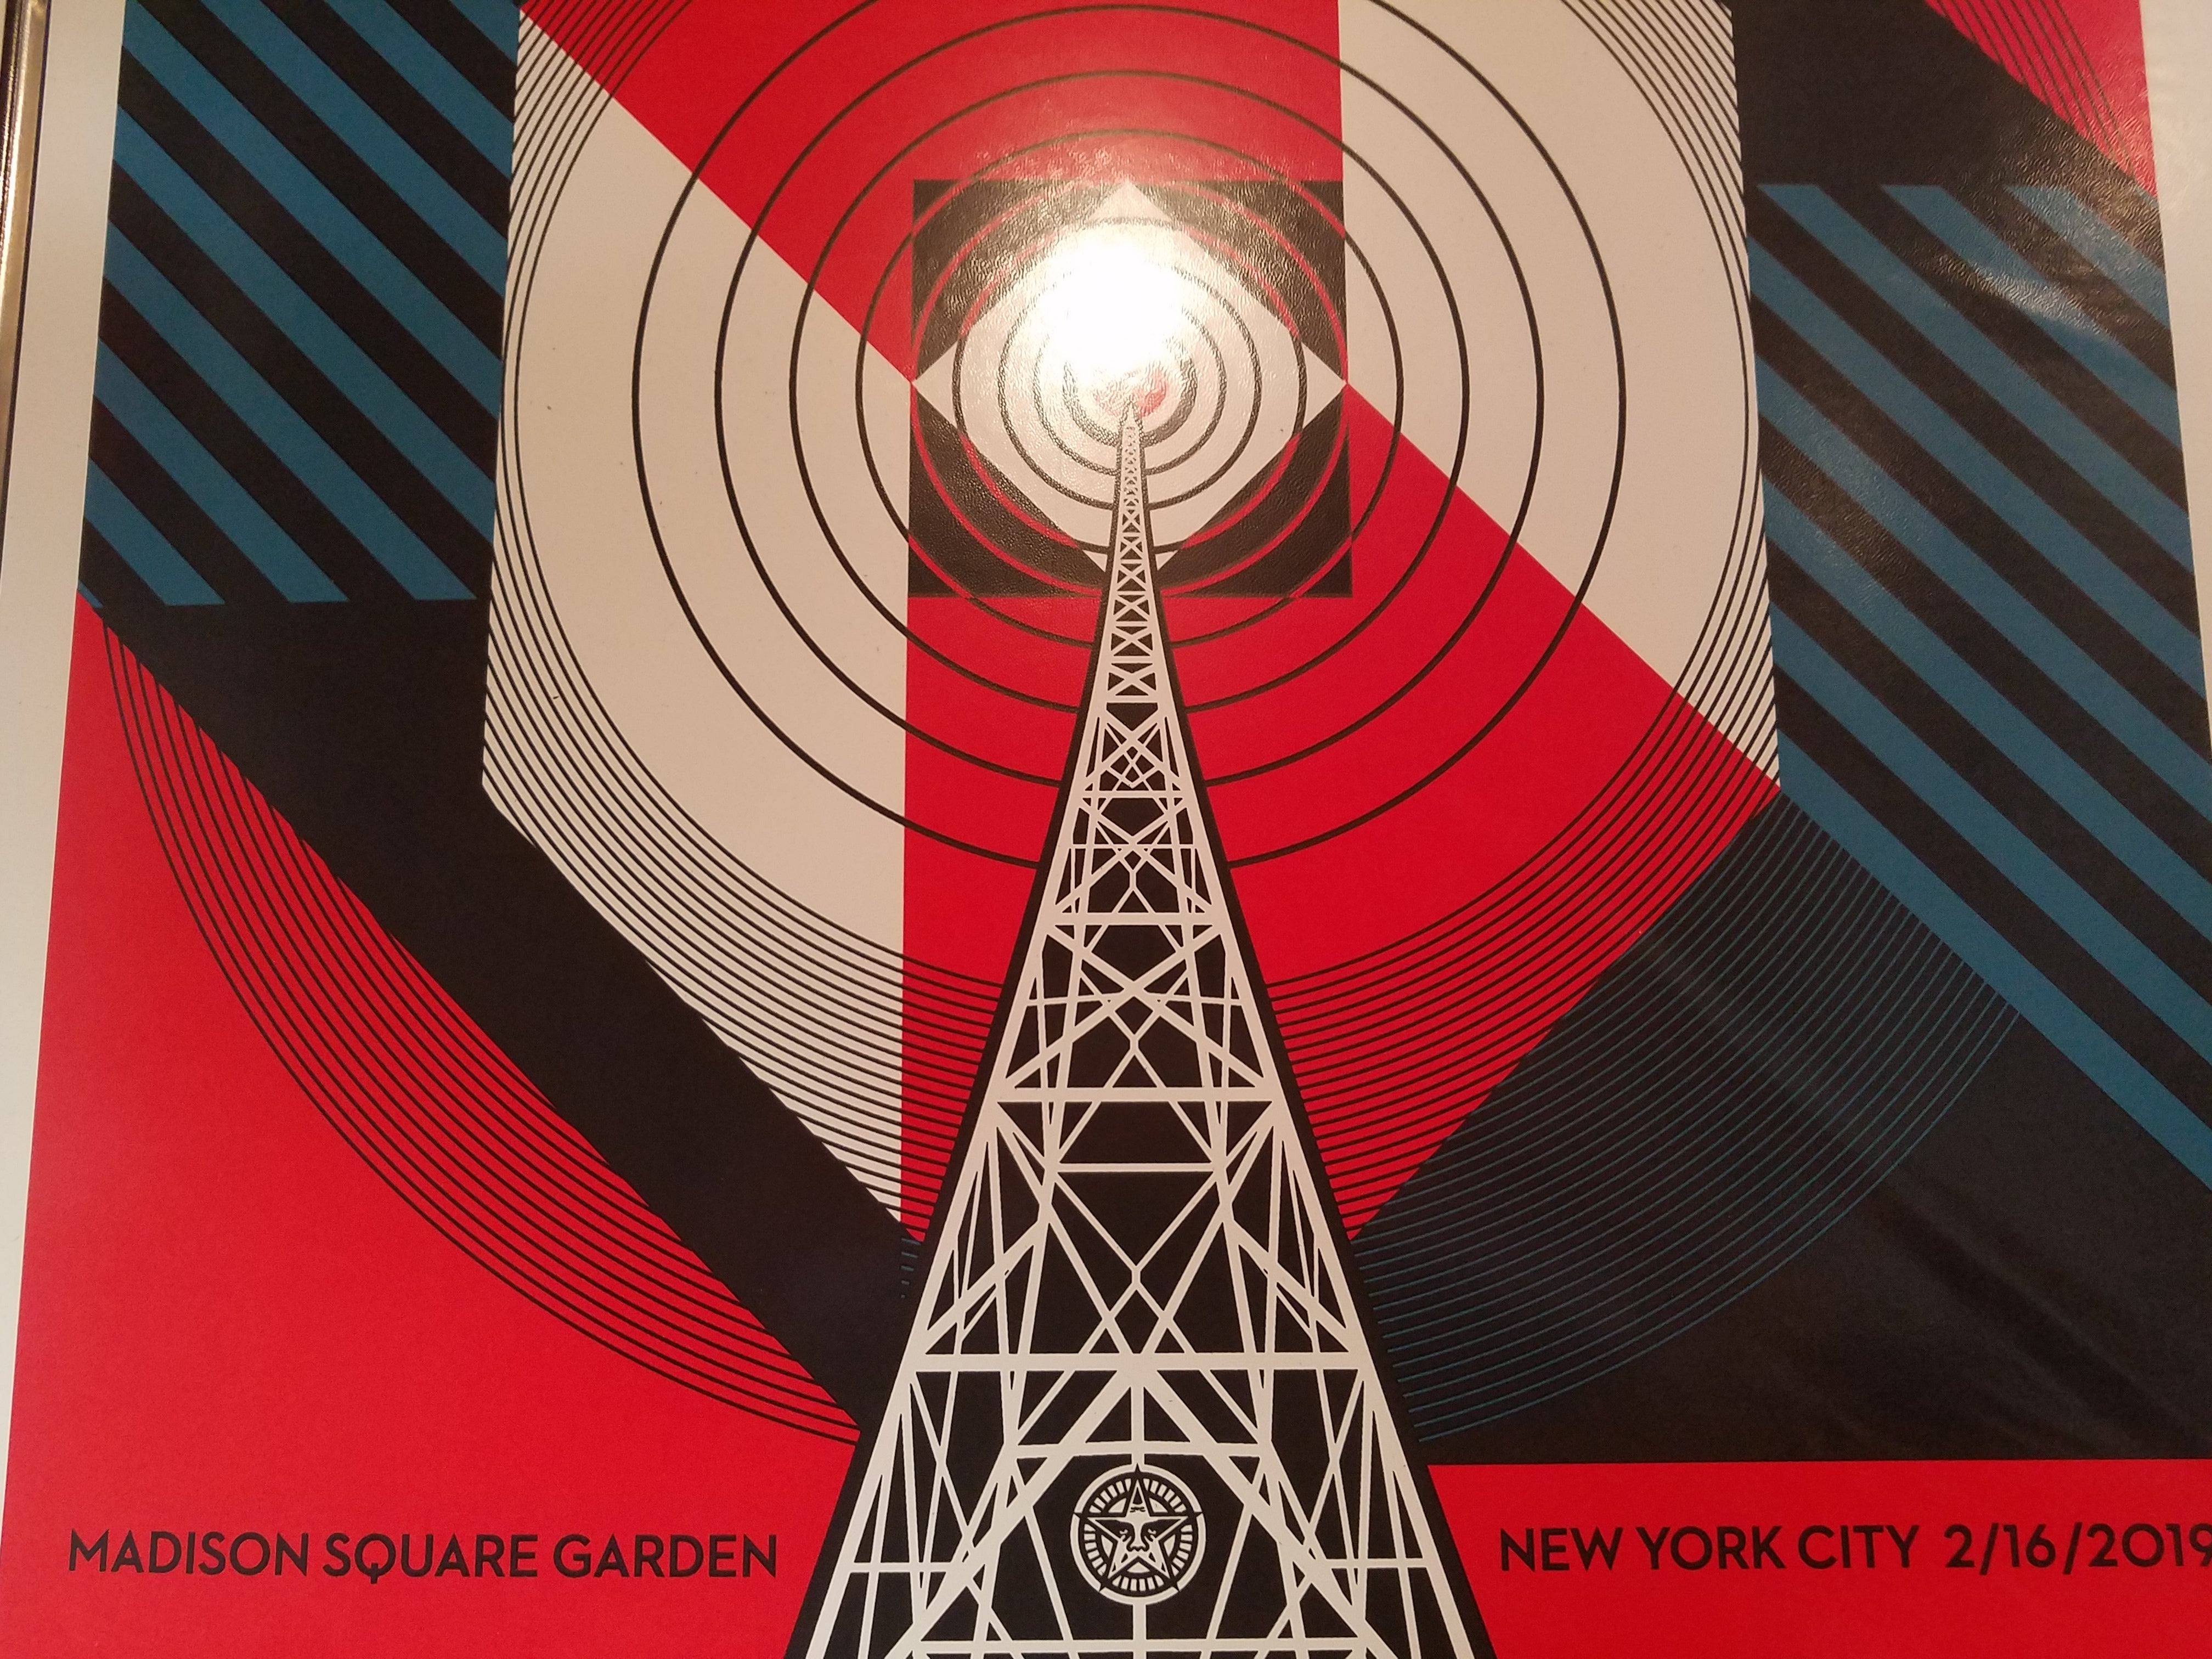 Title: Interpol - NYC Calling  Artist: Shepard Fairey  Edition:  xxx/550  Type: Screen print poster  Size: 18" X 24"  Venue: Madison Square Garden  Location: NY, NY  Notes:   2/16/19 Limited edition of 550 copies in total, signed and numbered by the artist  Print is stored flat in very good condition. Following purchase, prints are rolled in archival paper and shipped with bubble wrap in sturdy cardboard tubes.  Check out our other listings for more hard-to-find and out-of-print posters.